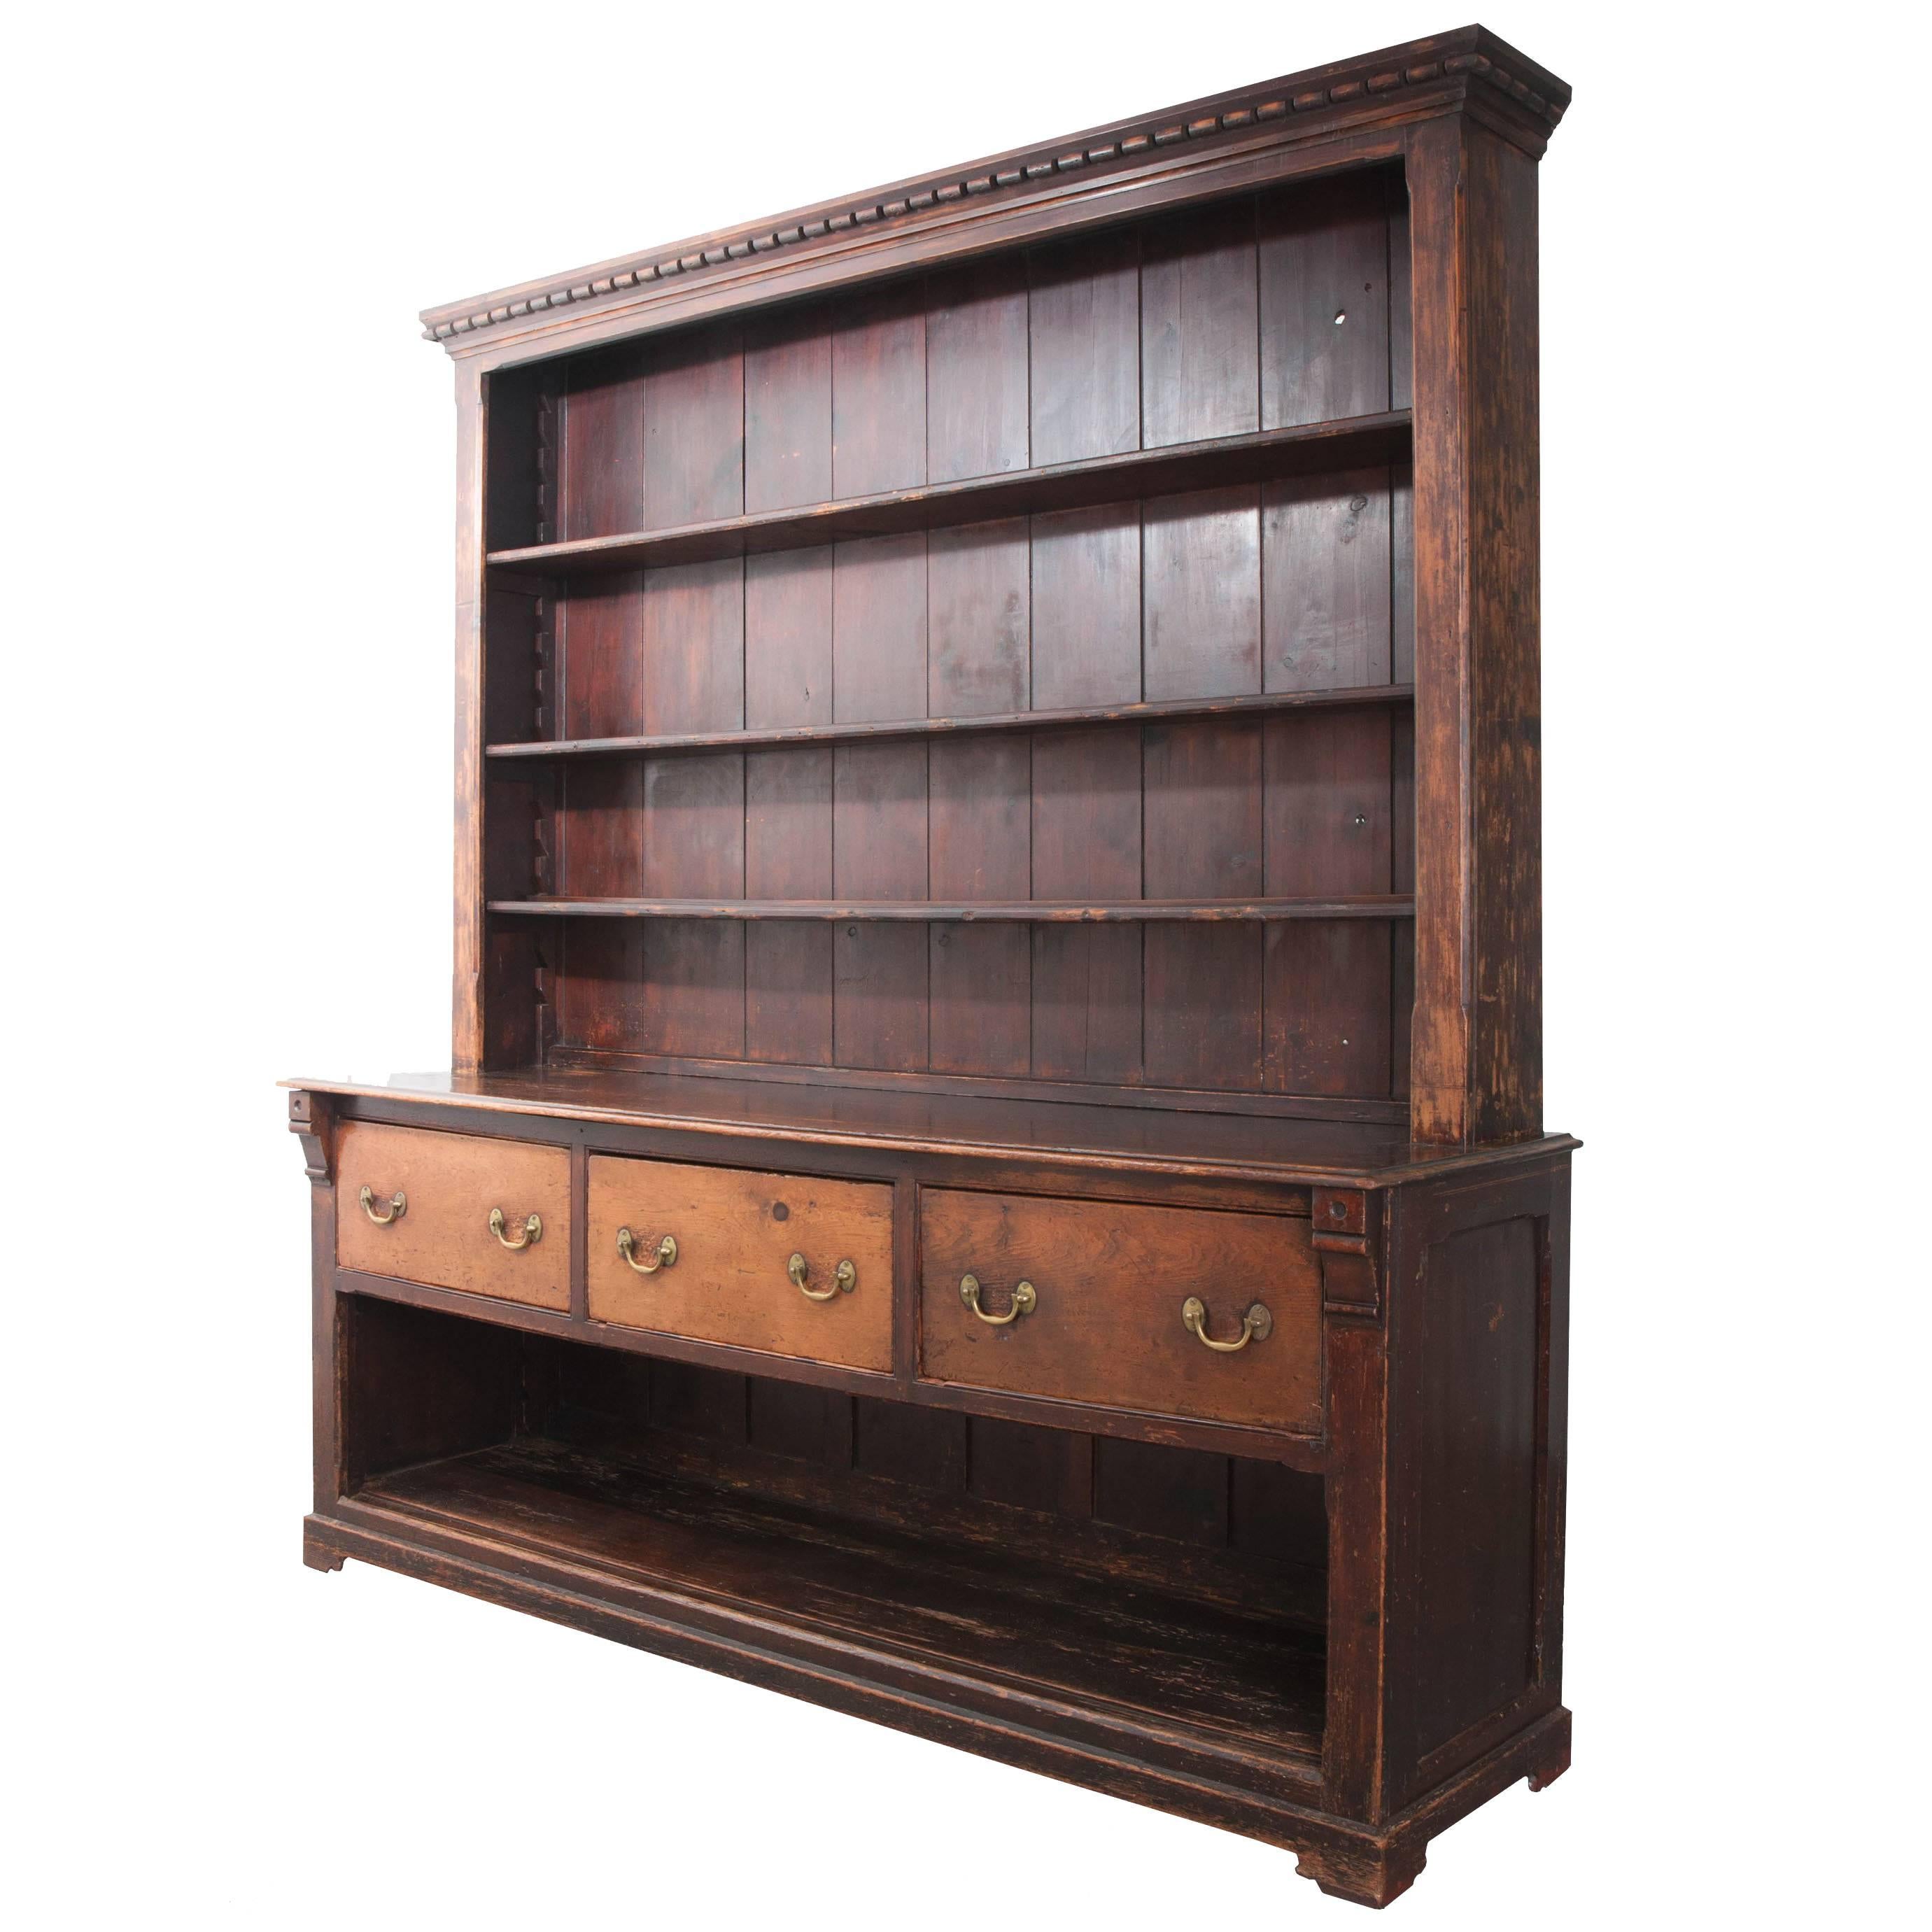 English Early 19th Century Pine Dresser with Potboard